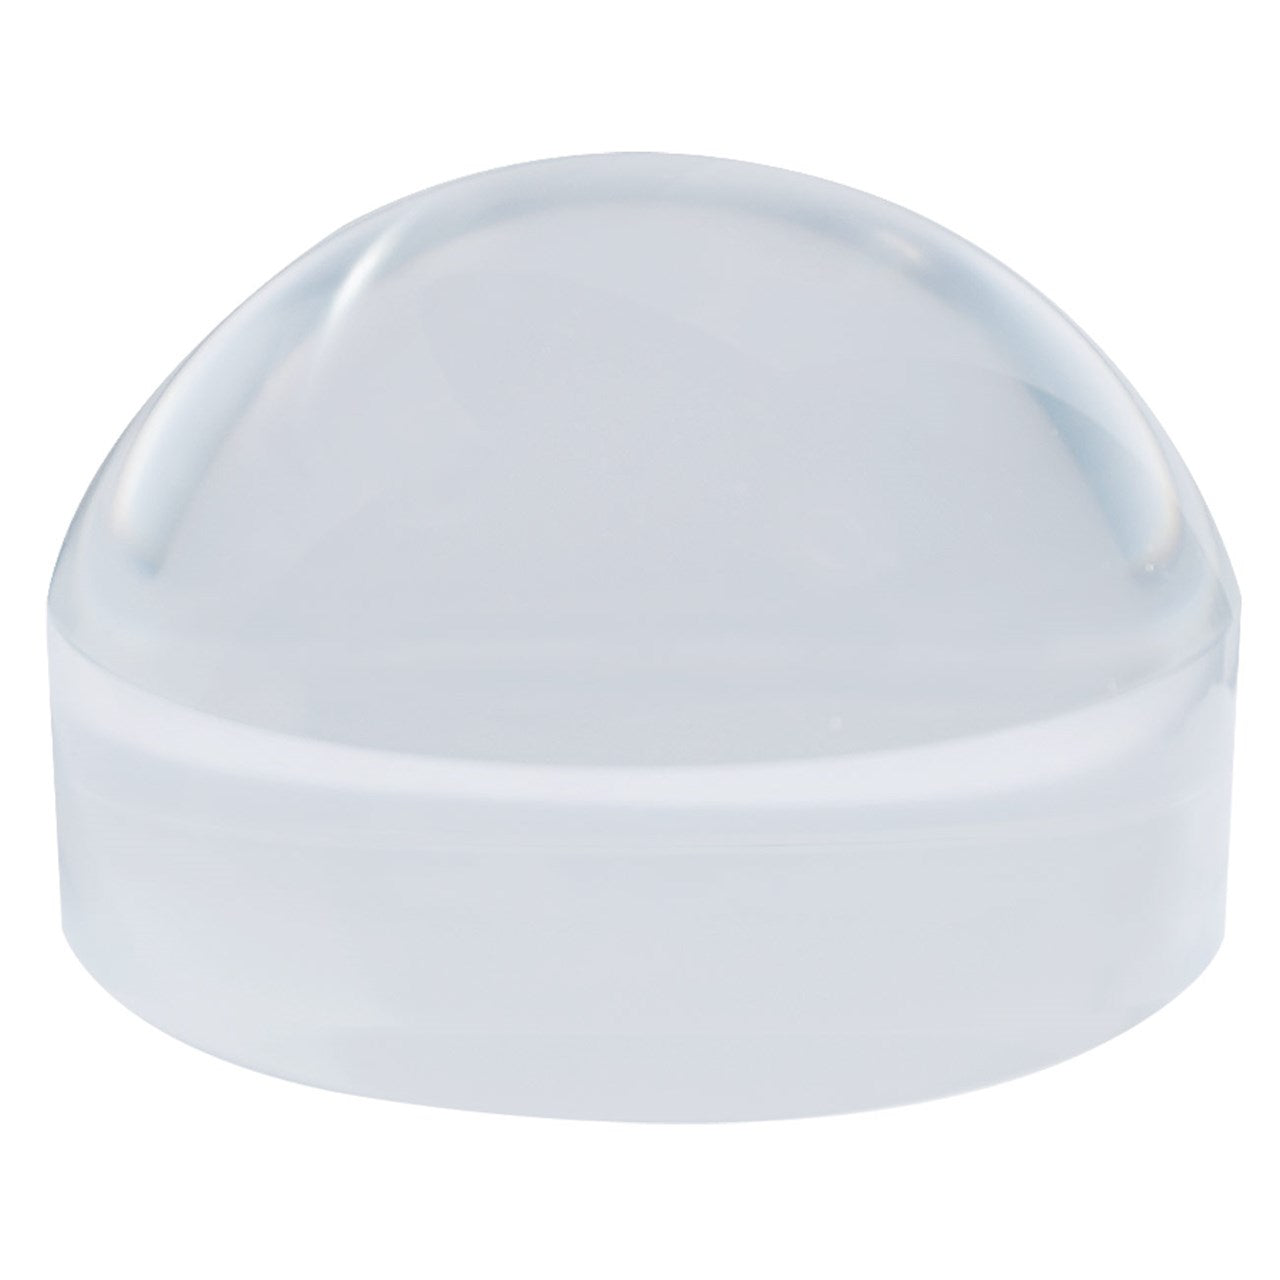 An acrylic based dome with a white base.